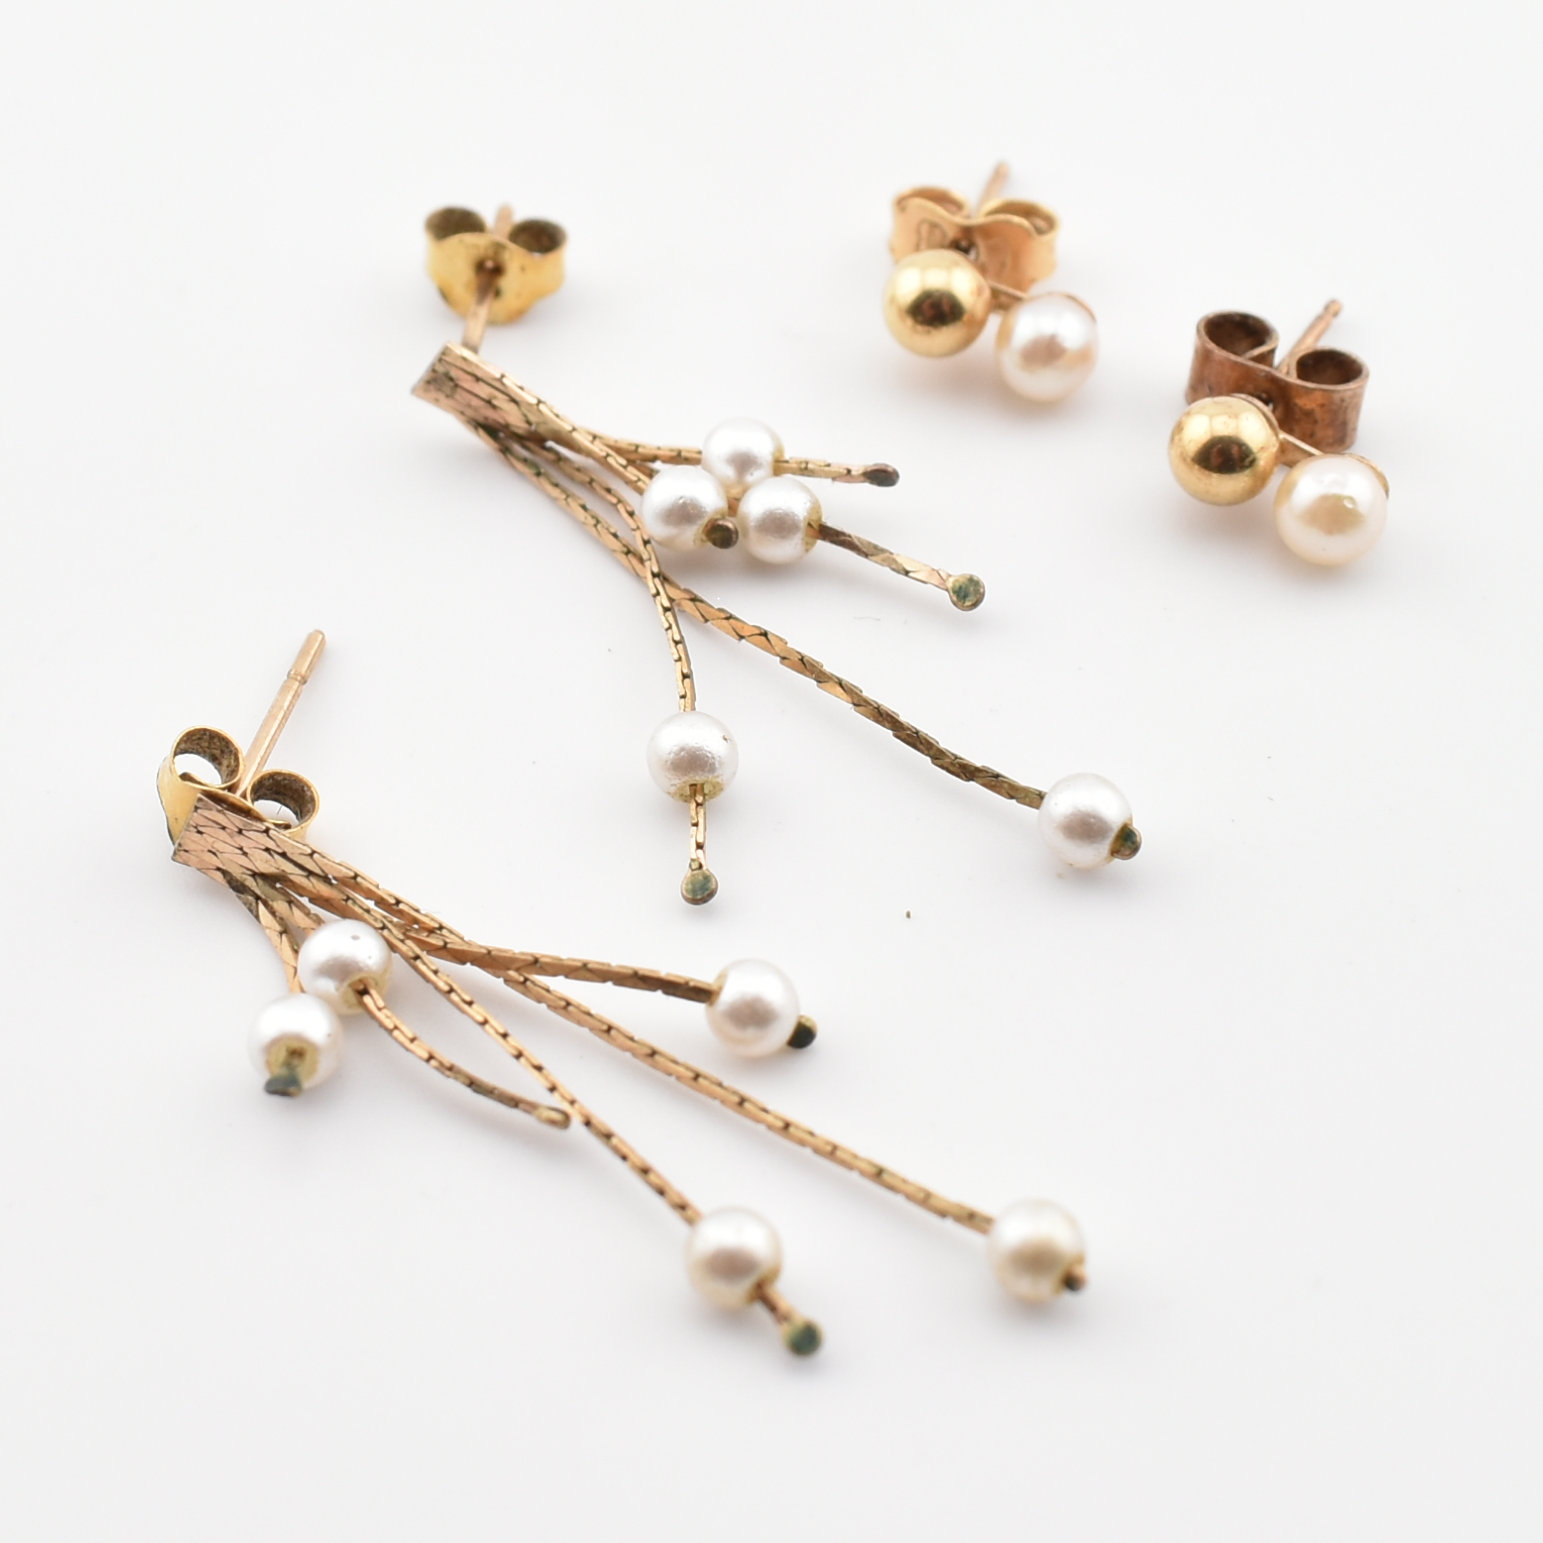 TWO PAIRS OF 9CT GOLD & PEARL EARRINGS - Image 3 of 3